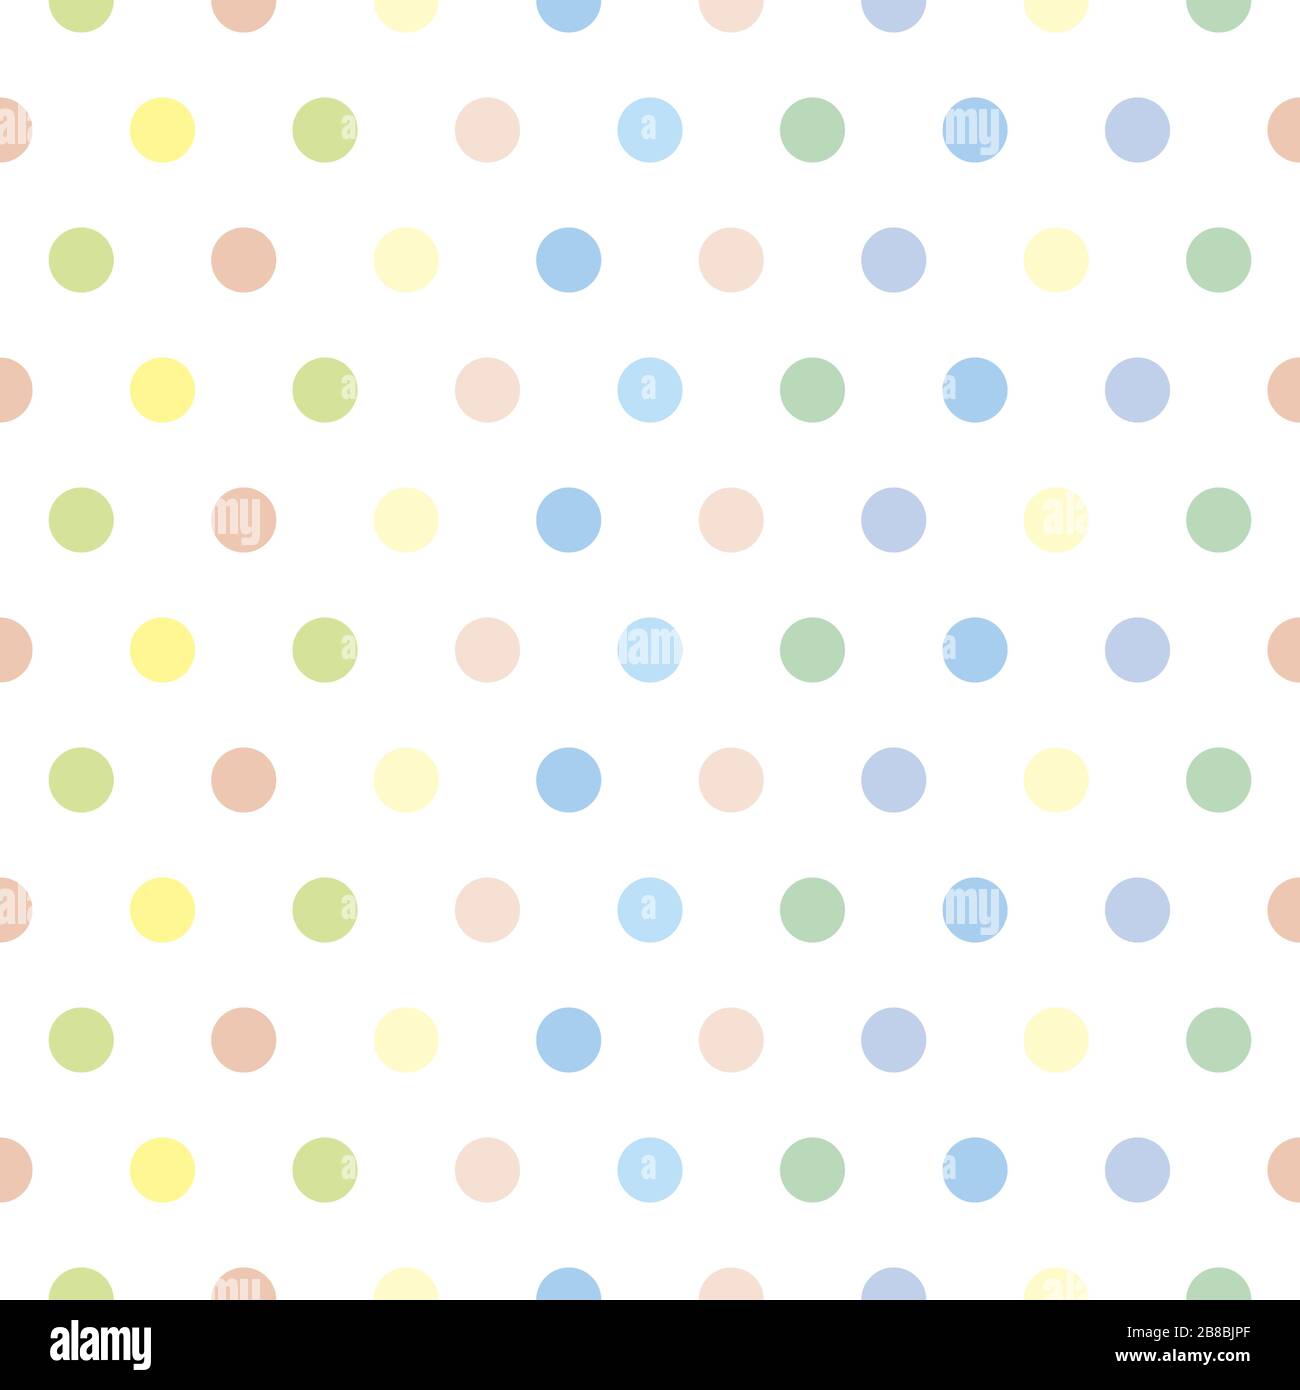 Seamless vector pattern or texture with polka dots on white background Stock Vector